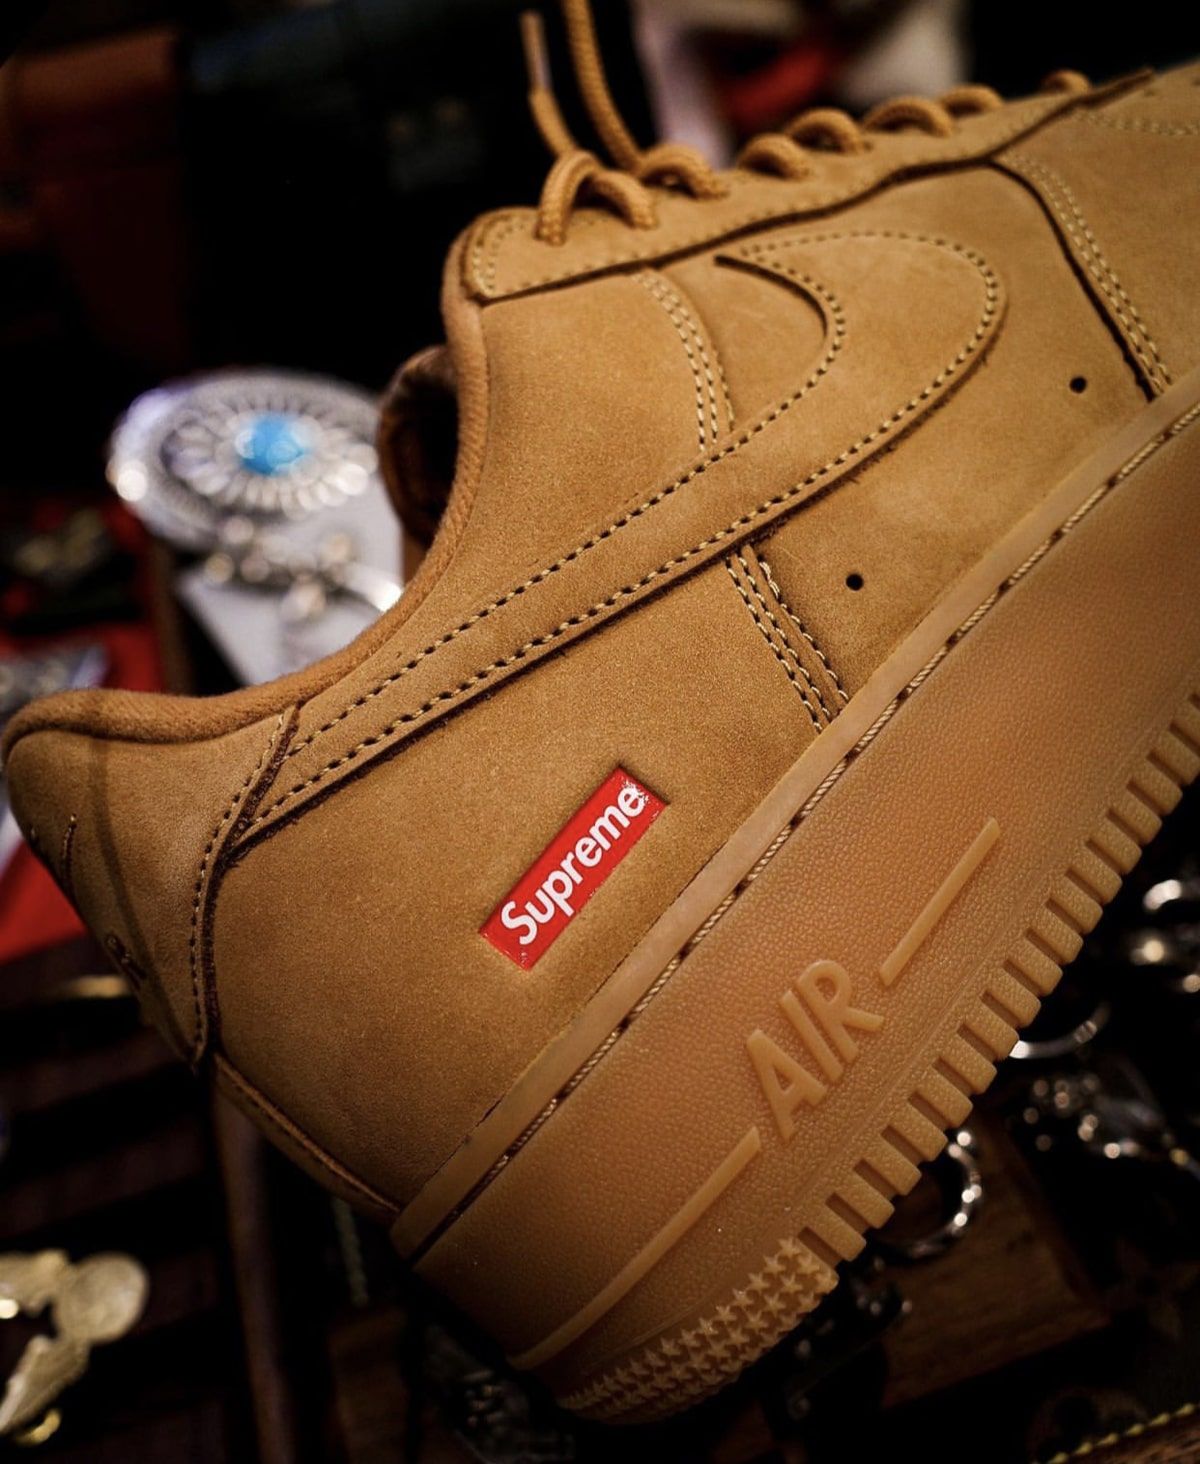 Supreme x Nike Air Force 1 Low “Flax” Confirmed for FW21 | House 